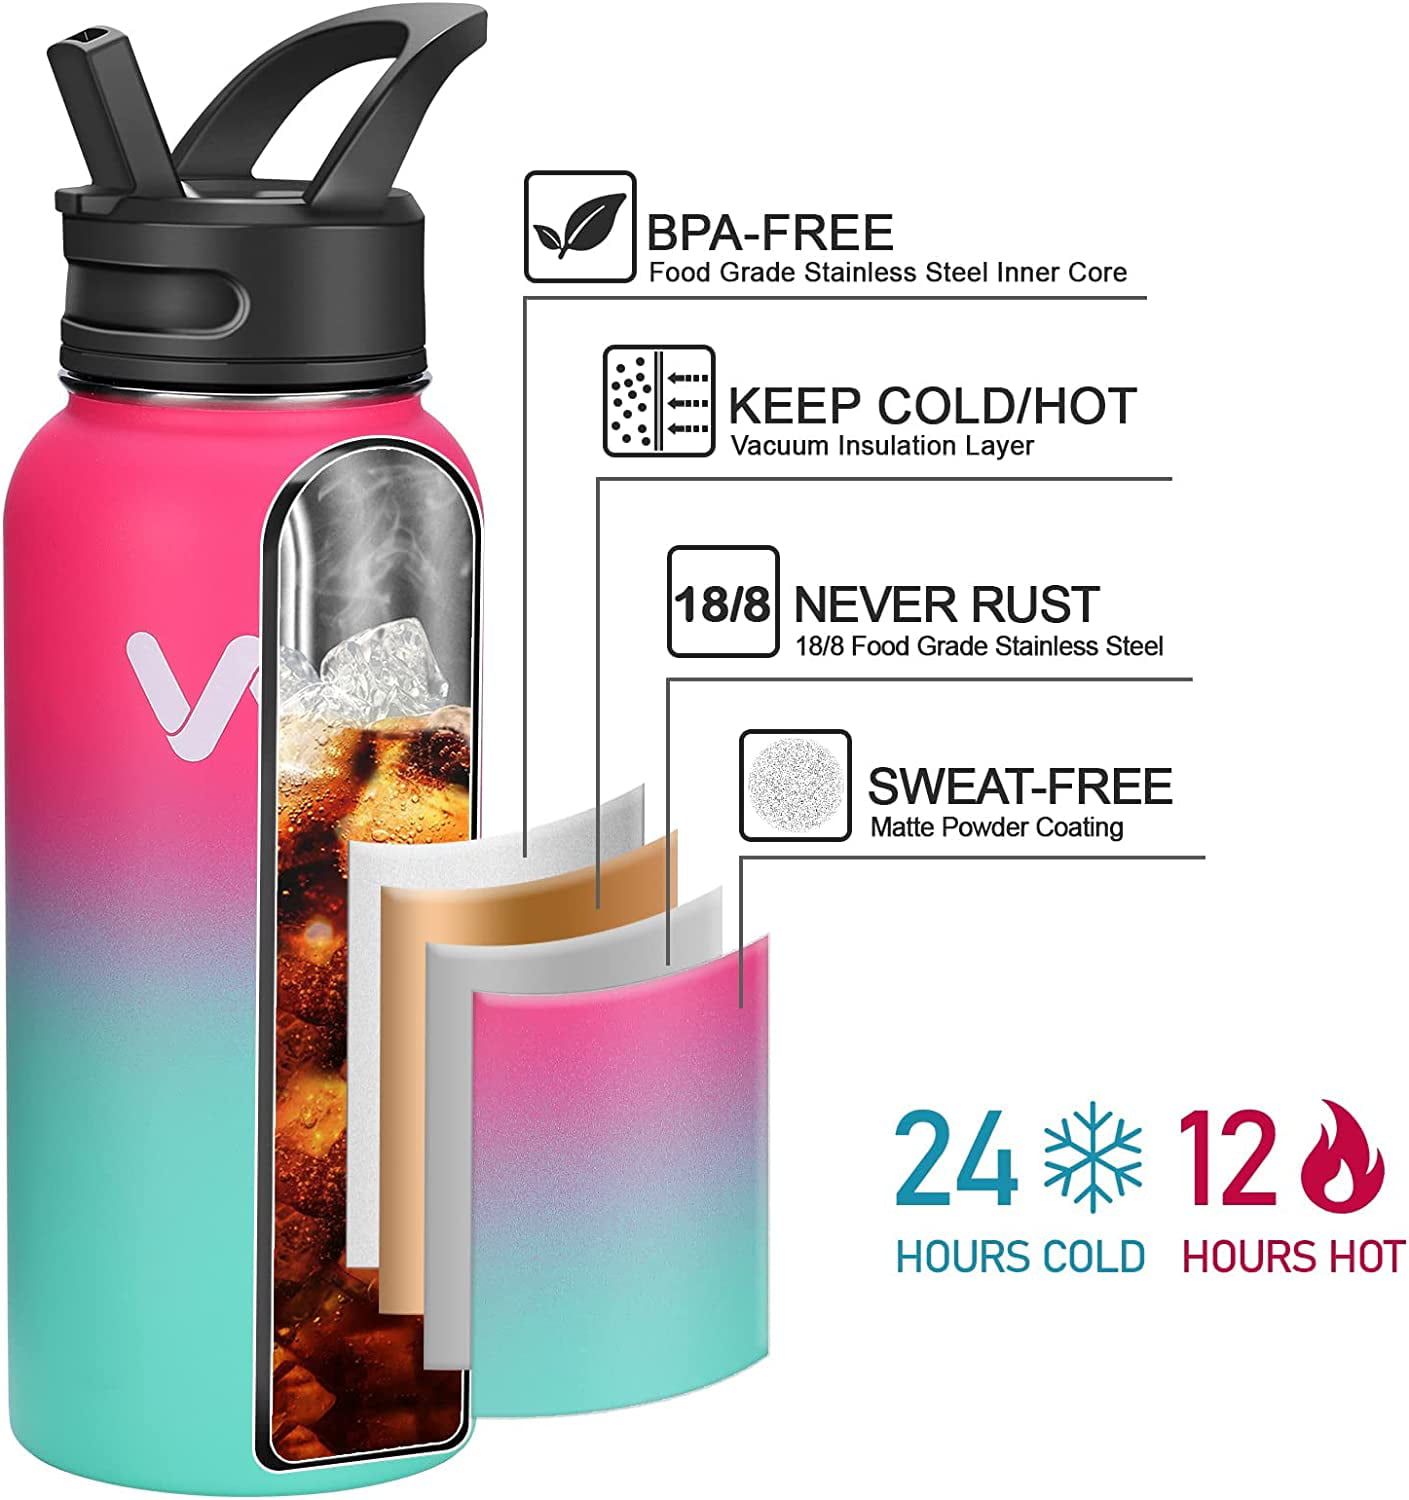 Wor-Wic 24 oz. Frosted Water Bottle